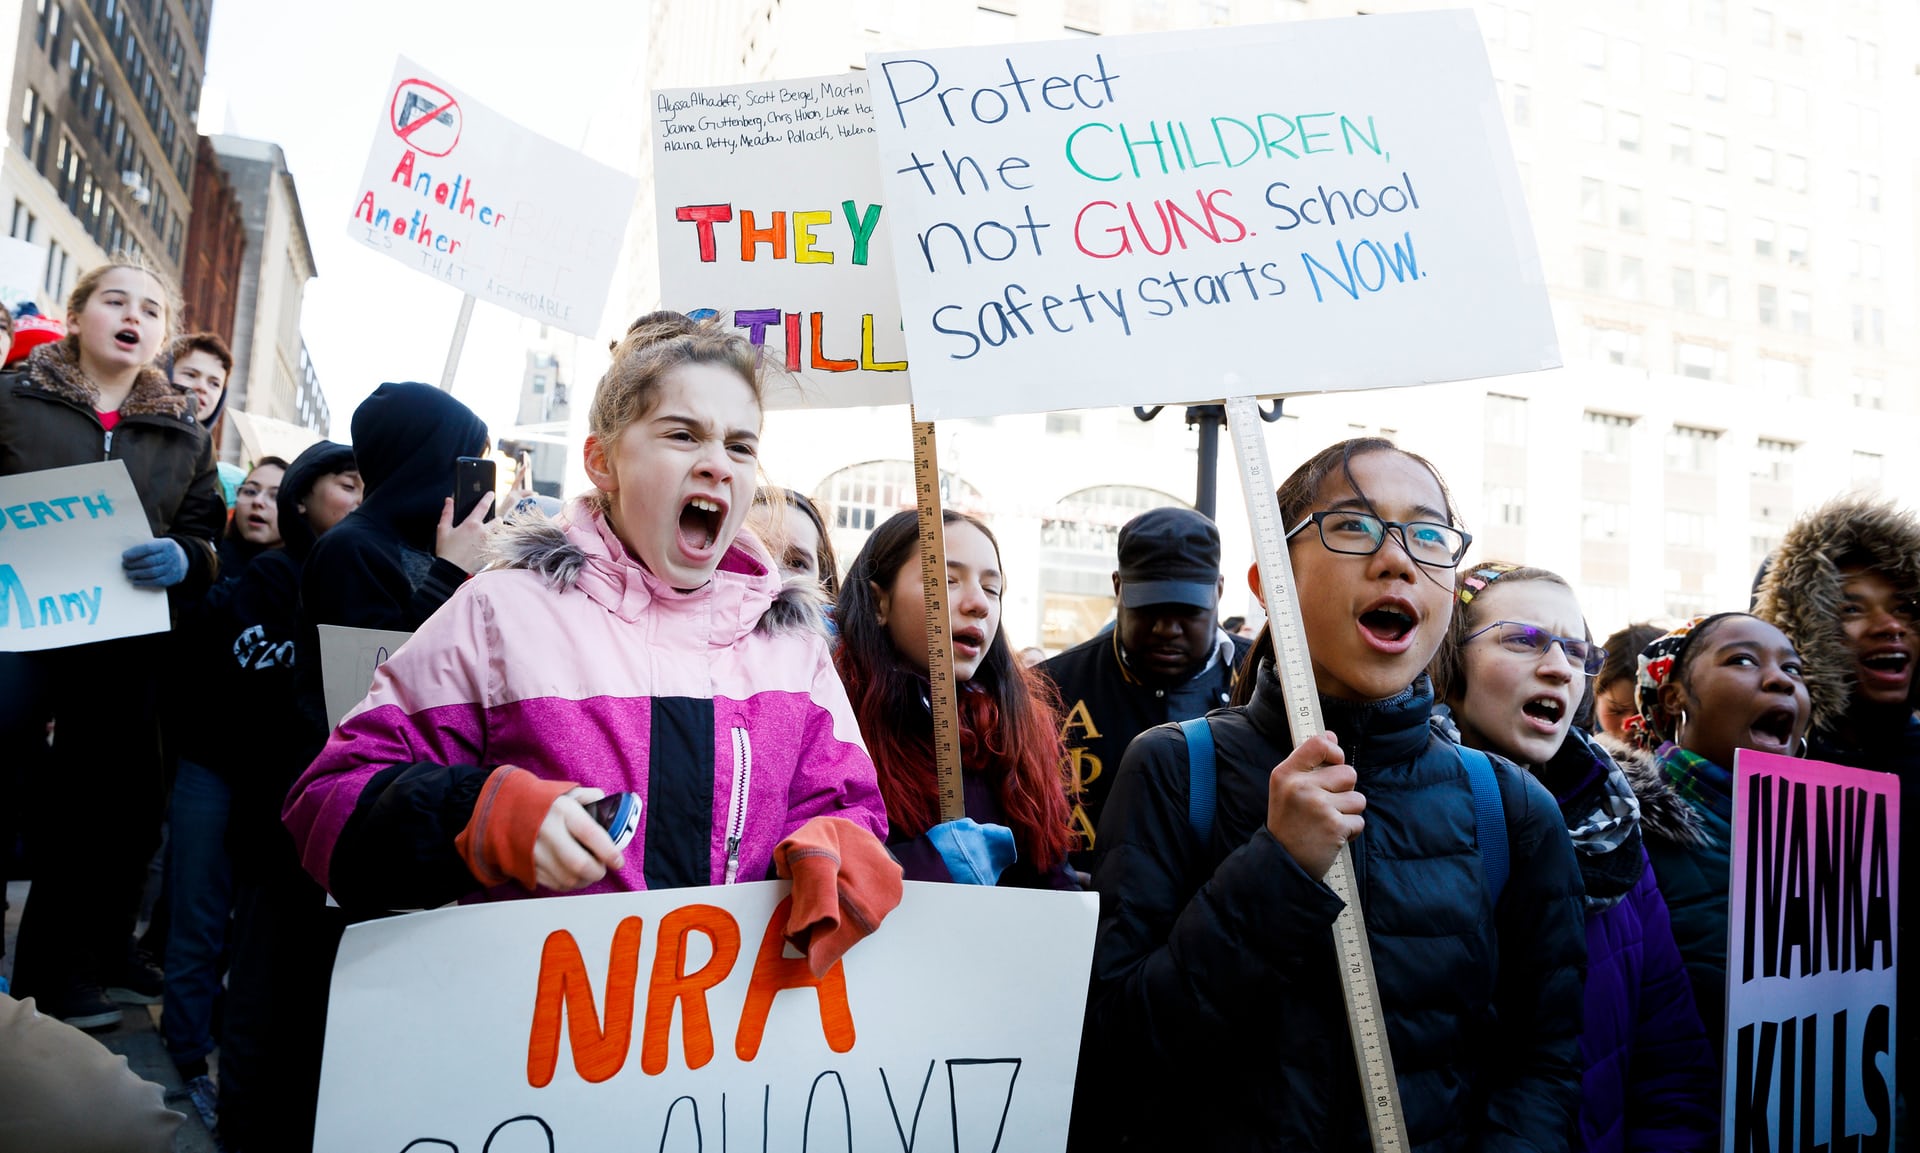 The students called for new gun safety legislation and opposed plans to arm schoolteachers. Photograph: Justin Lane/EPA